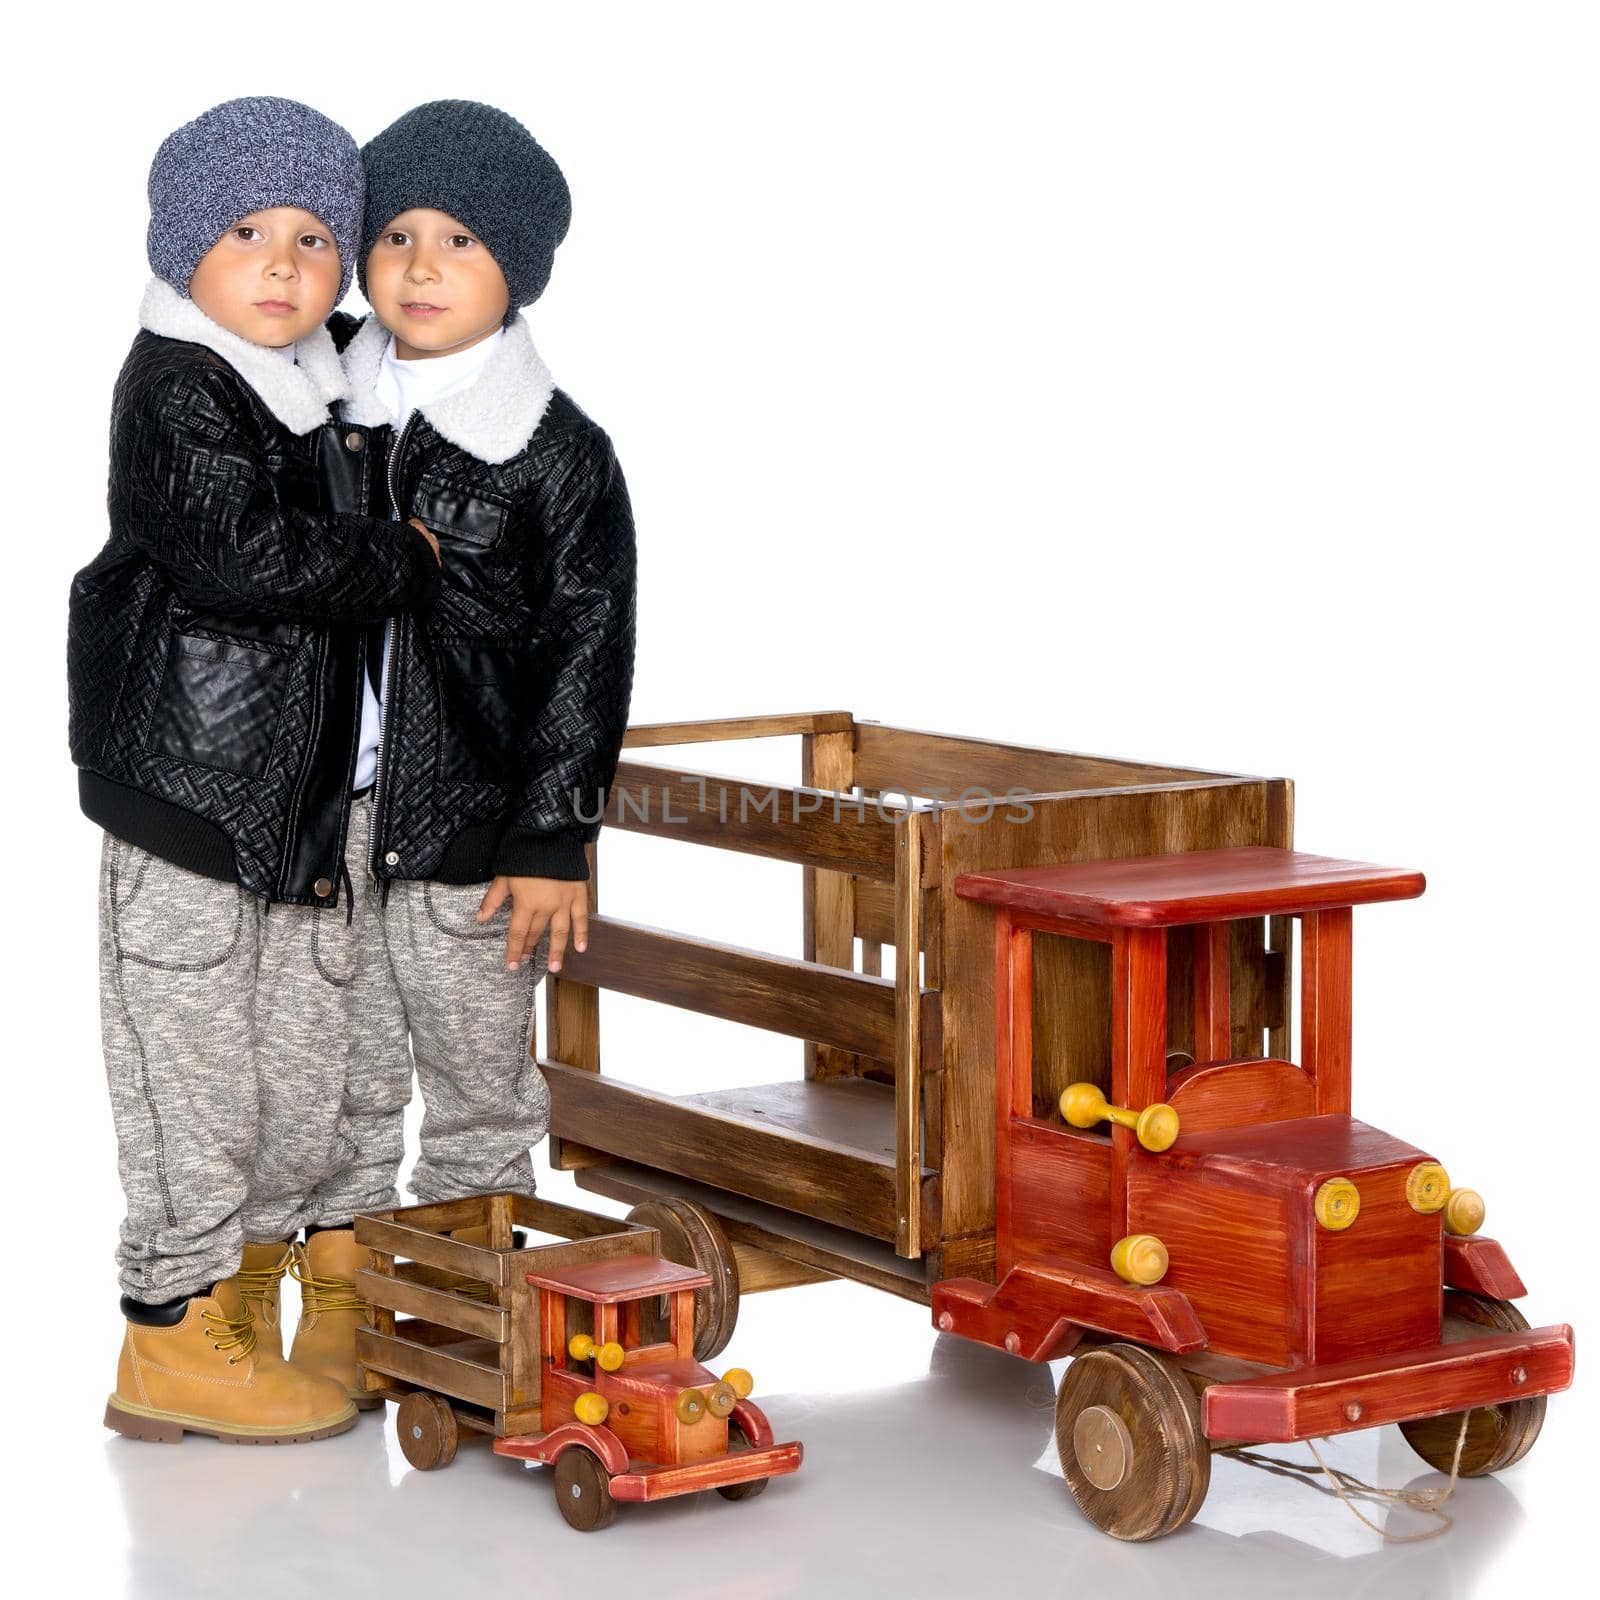 Two little boys play with wooden cars. In autumn jackets and hats. Isolated on white background.